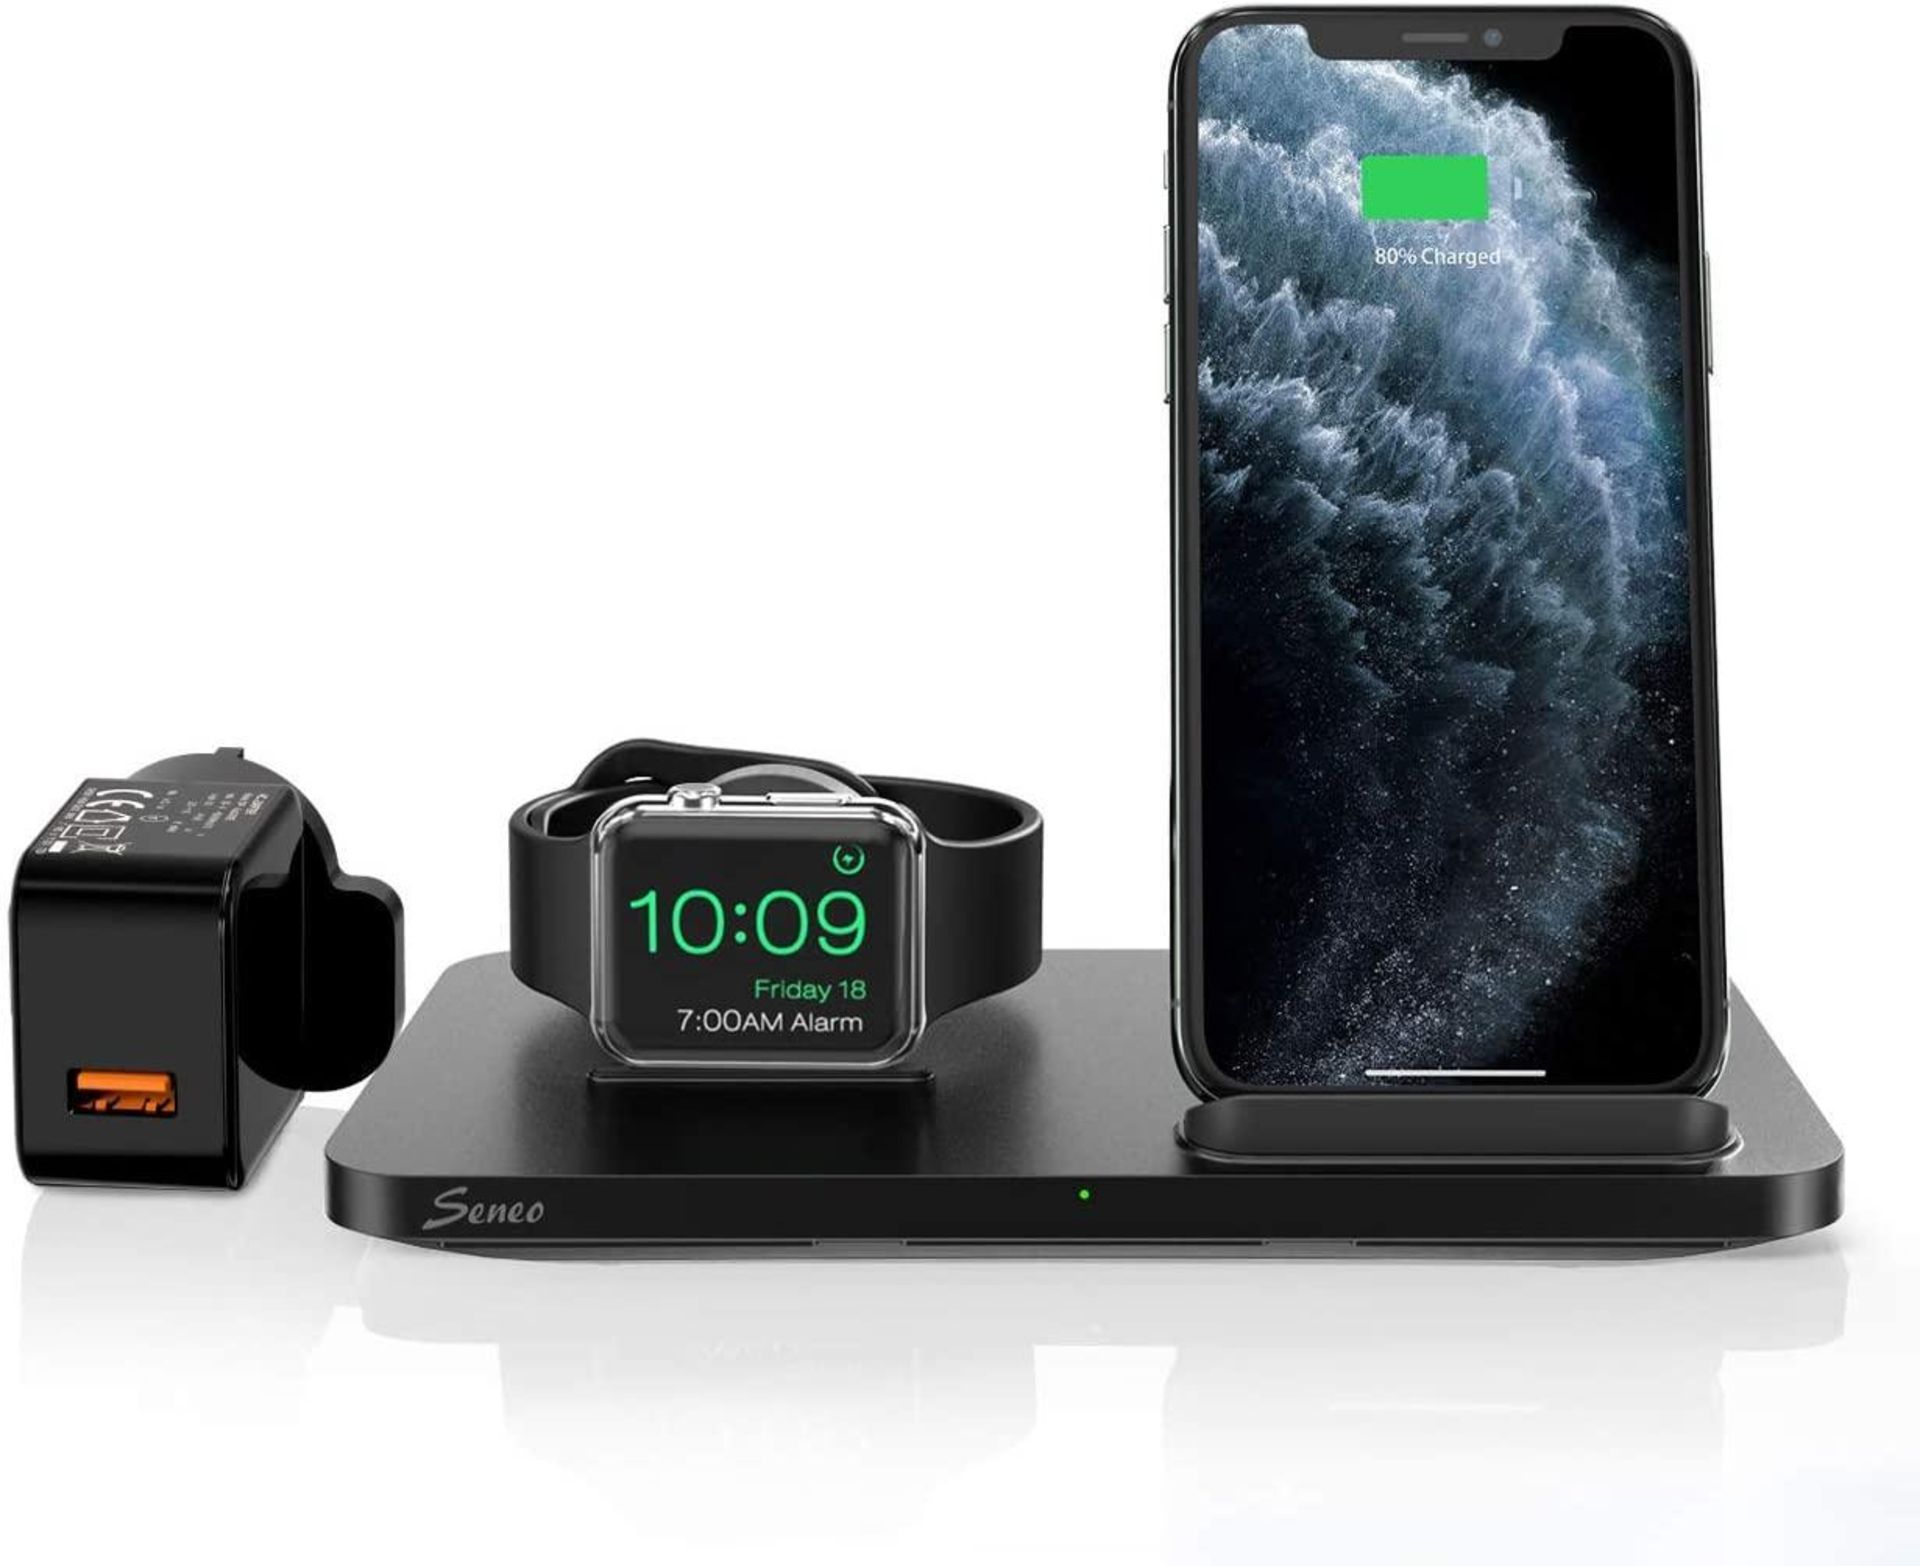 Seneo 2 in 1 Wireless Charger, Apple Watch Charging Stand (2 in 1 Stand with Adapter) - £30.99 RRP